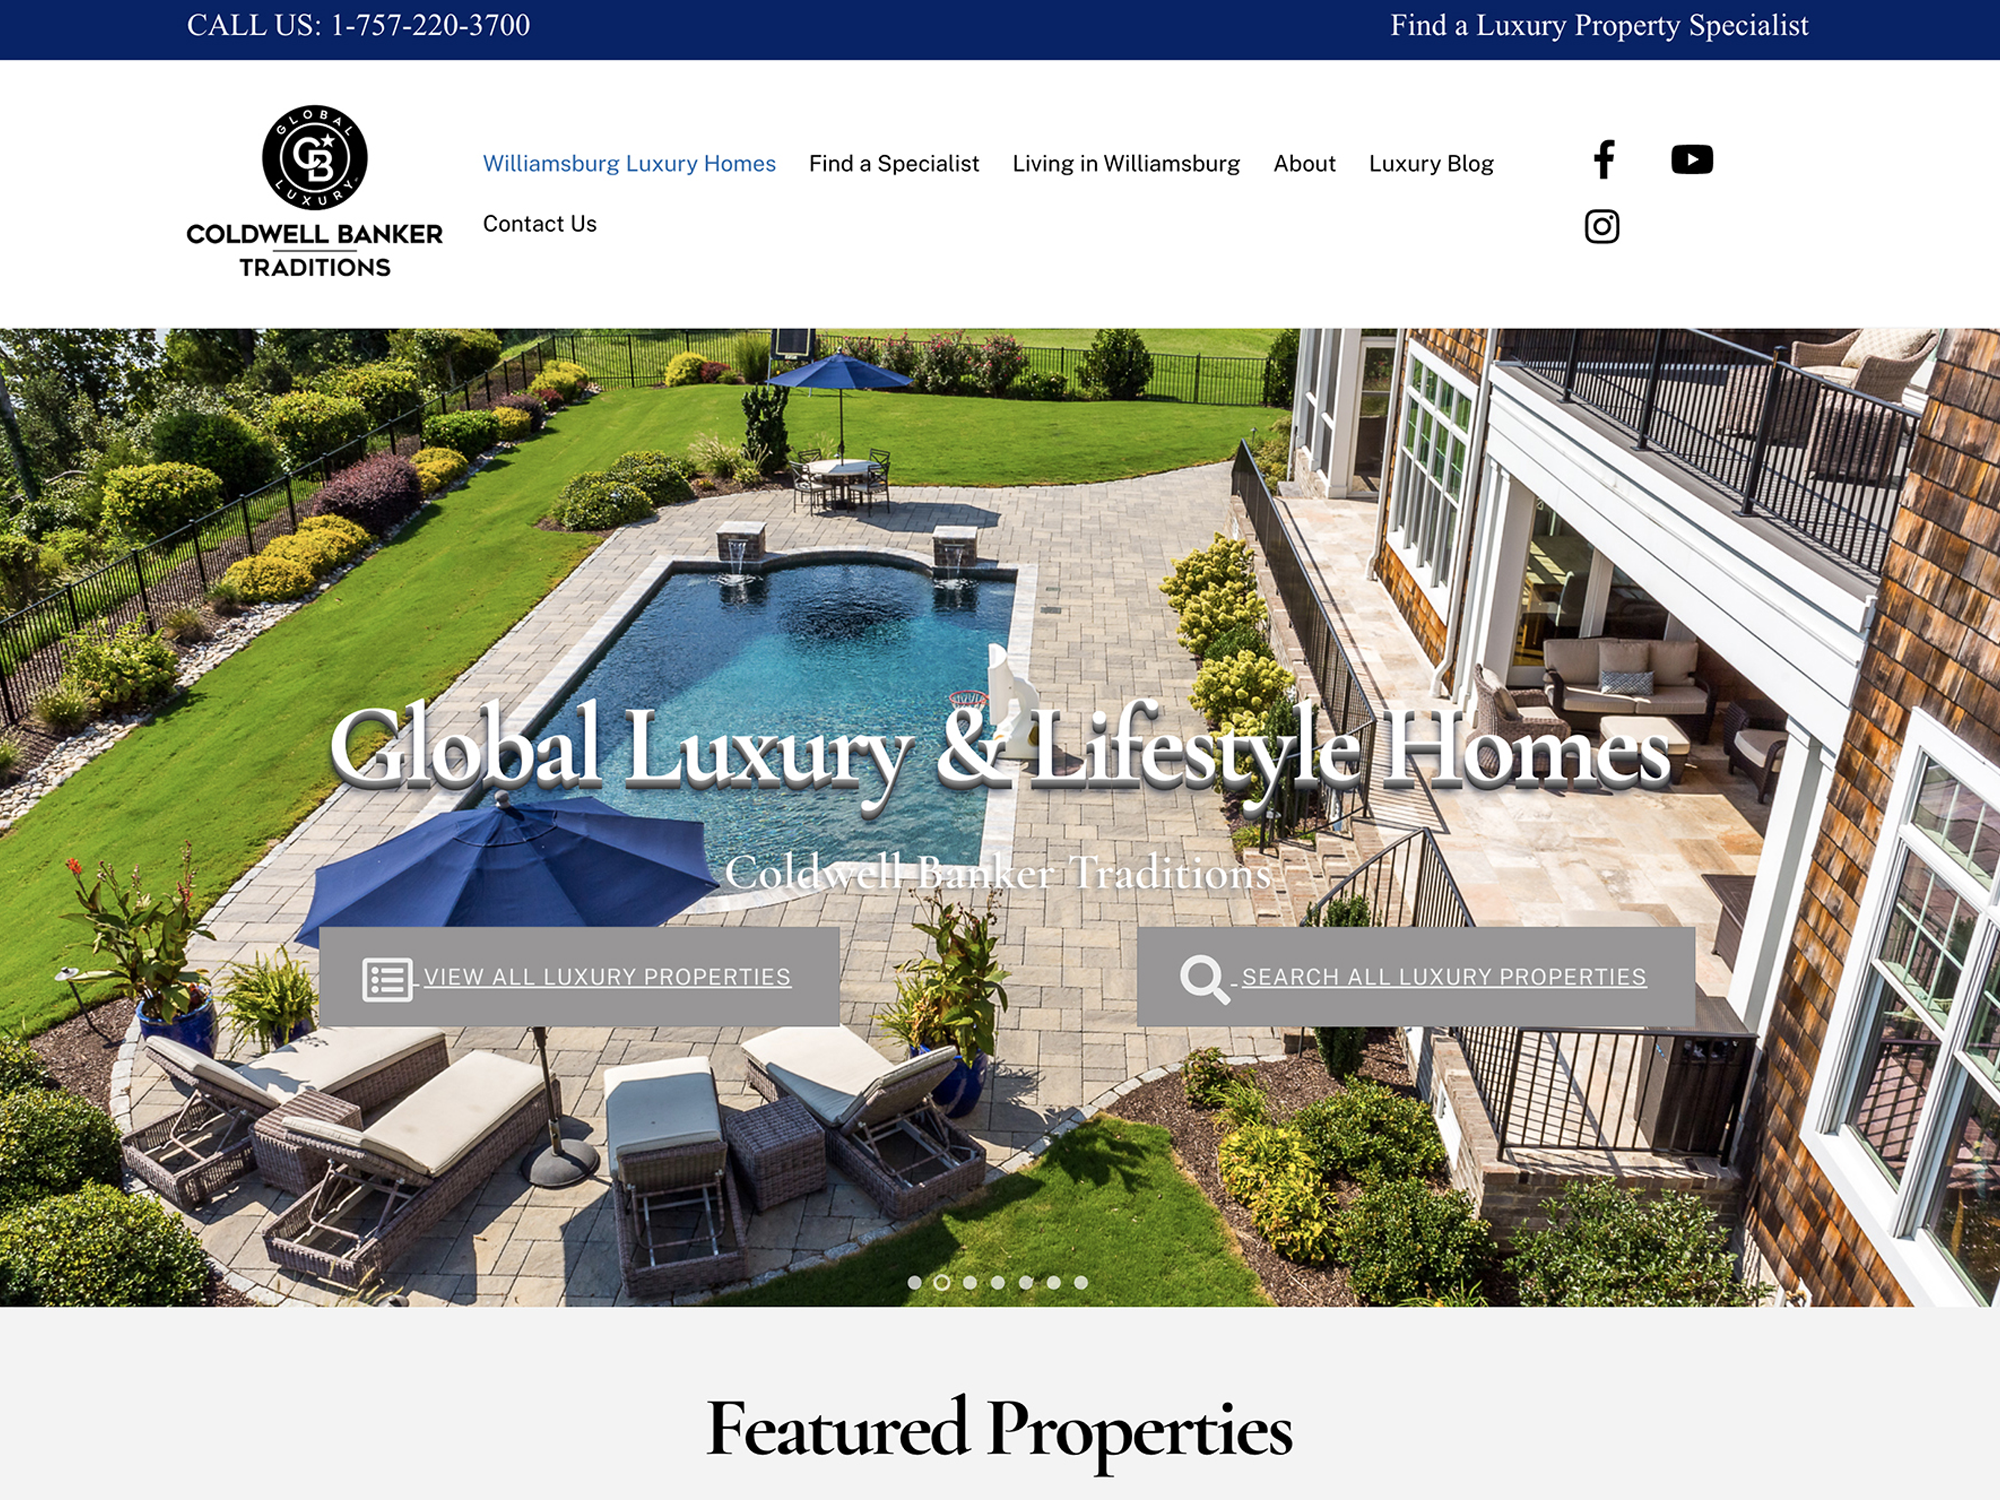 Coldwell Banker Traditions Luxury & Lifestyle Homes